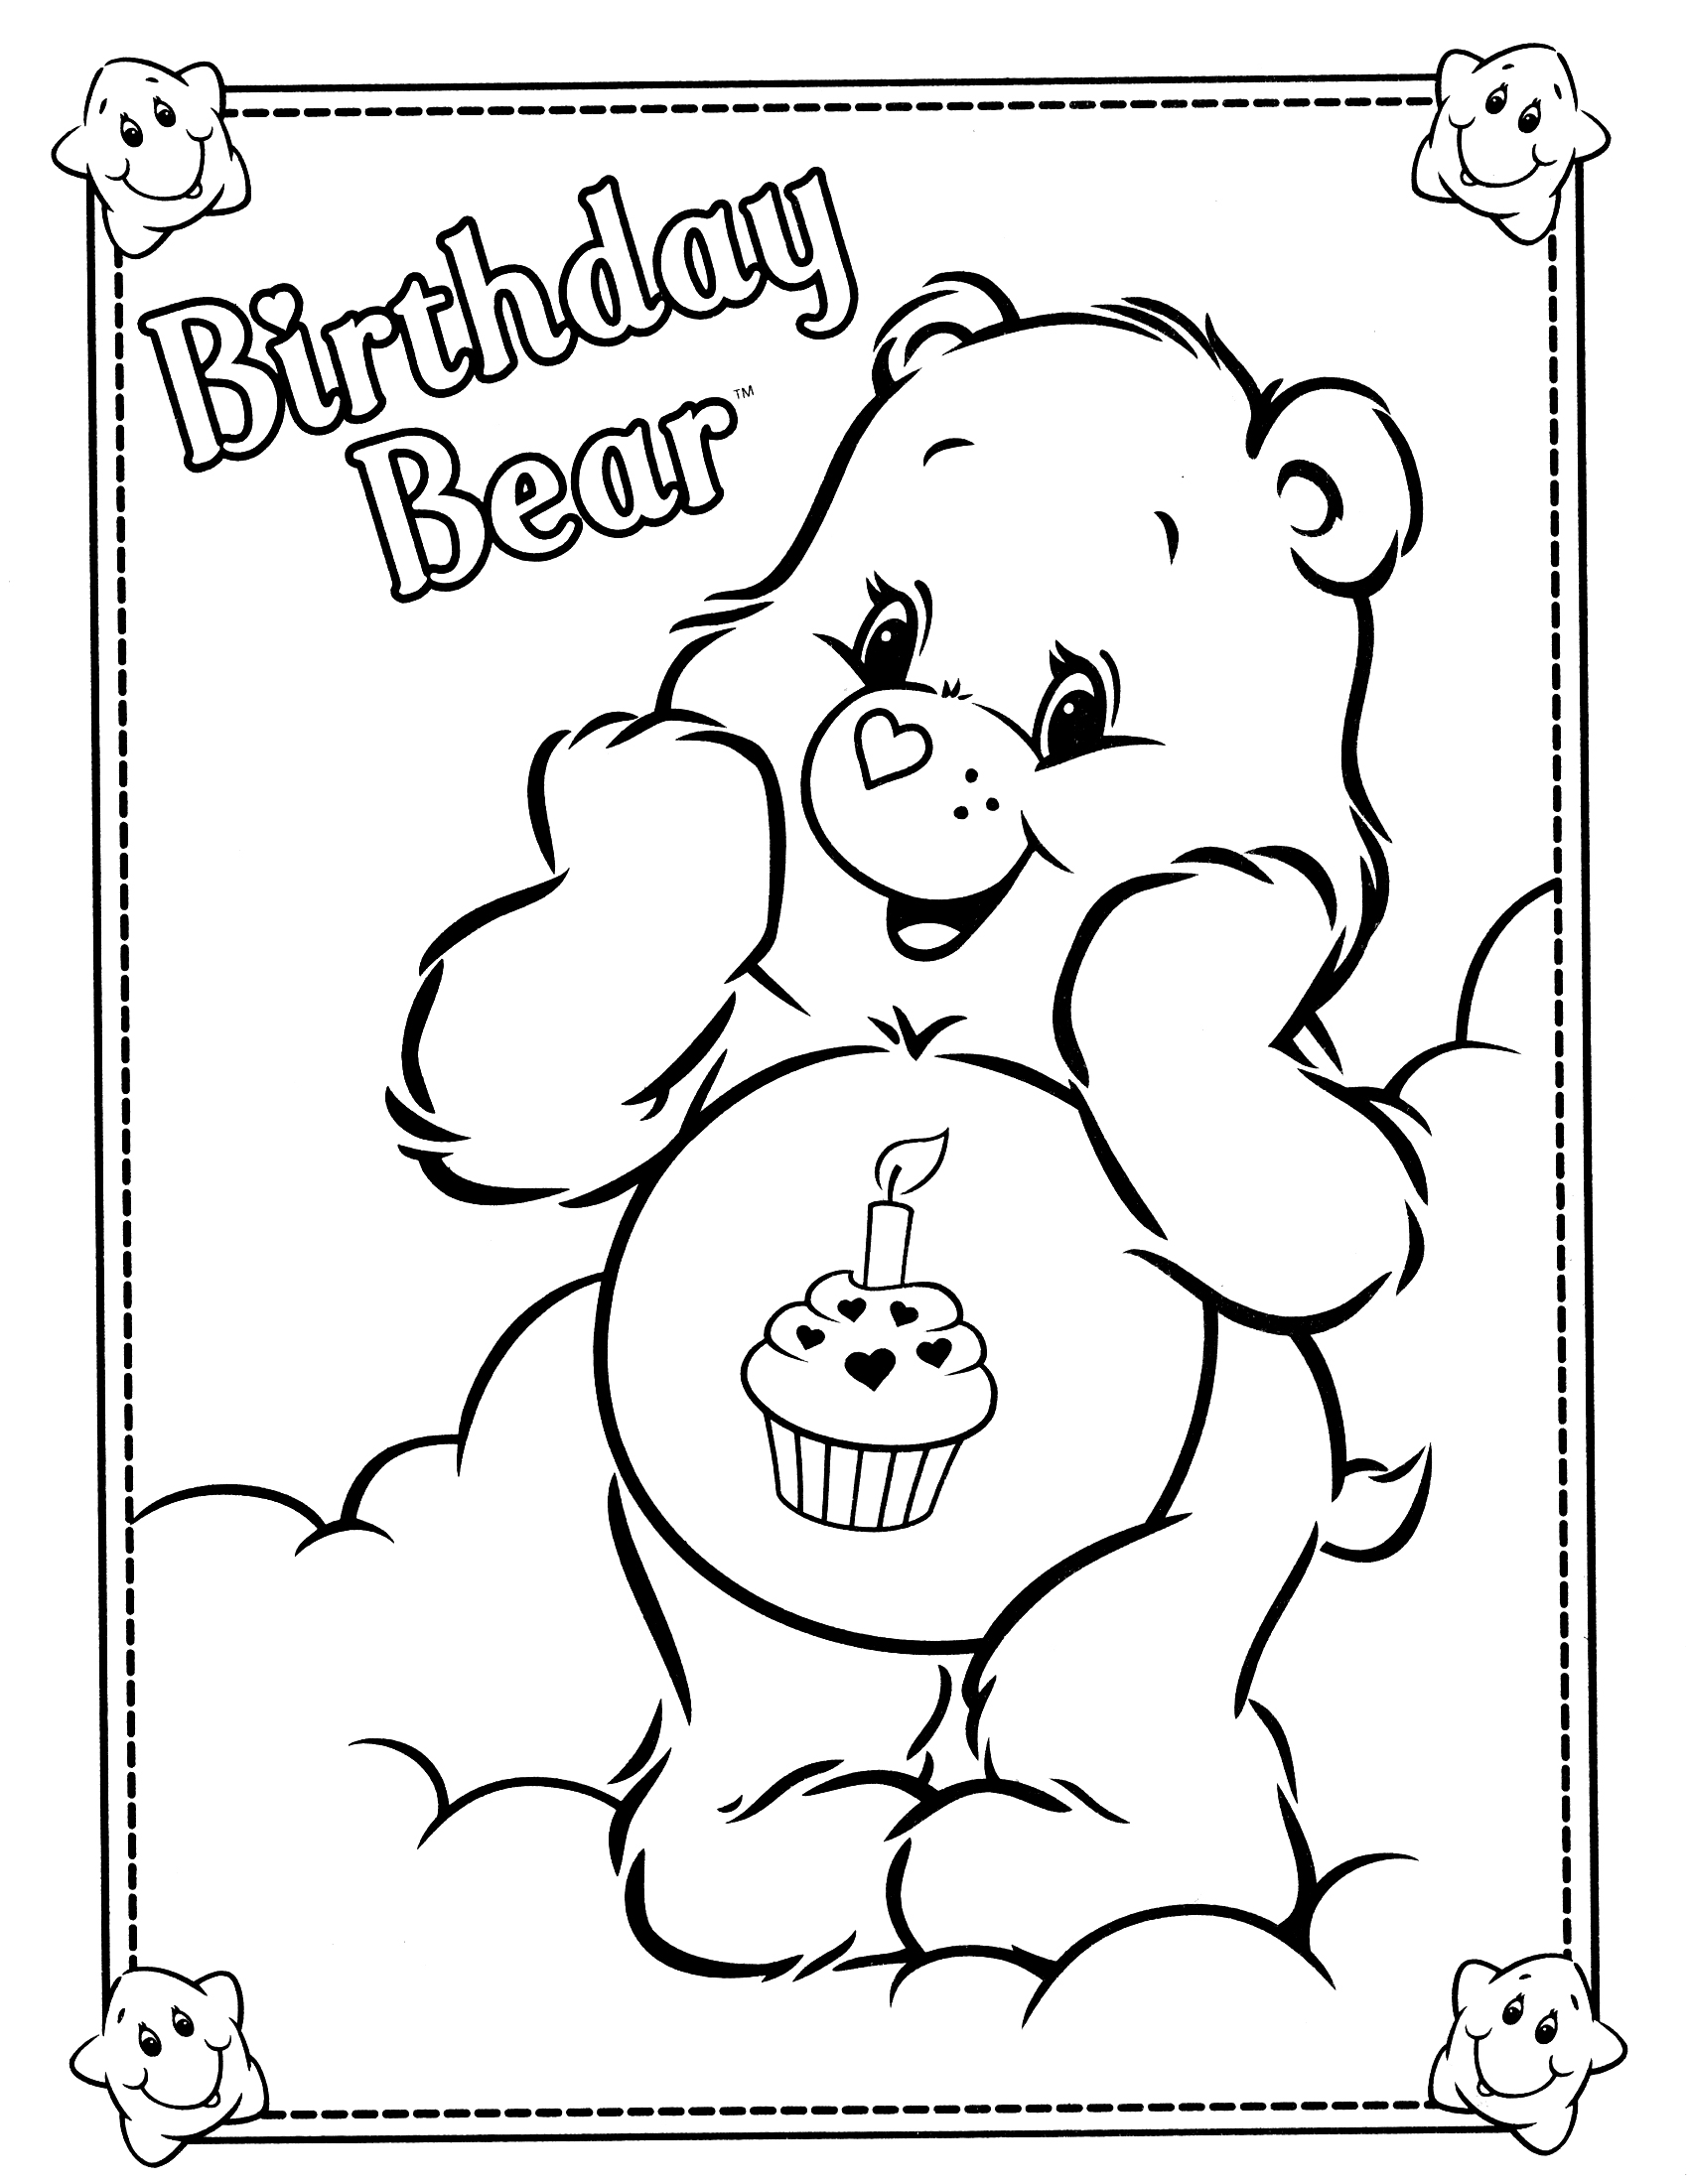 coloring-page-care-bears-37134-cartoons-printable-coloring-pages